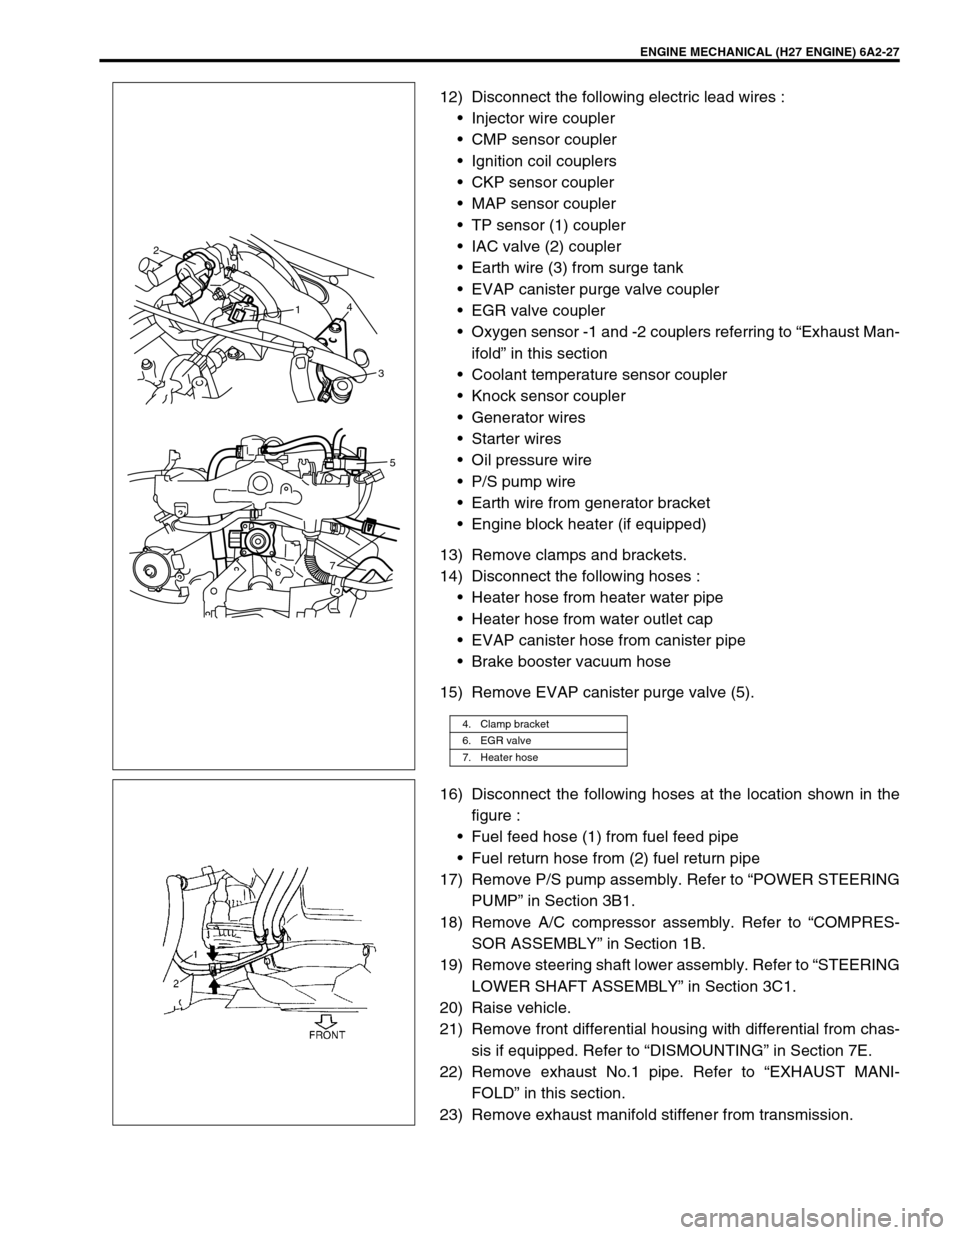 SUZUKI GRAND VITARA 1999 2.G Service Manual ENGINE MECHANICAL (H27 ENGINE) 6A2-27
12) Disconnect the following electric lead wires :
•Injector wire coupler
•CMP sensor coupler
•Ignition coil couplers
•CKP sensor coupler
•MAP sensor co